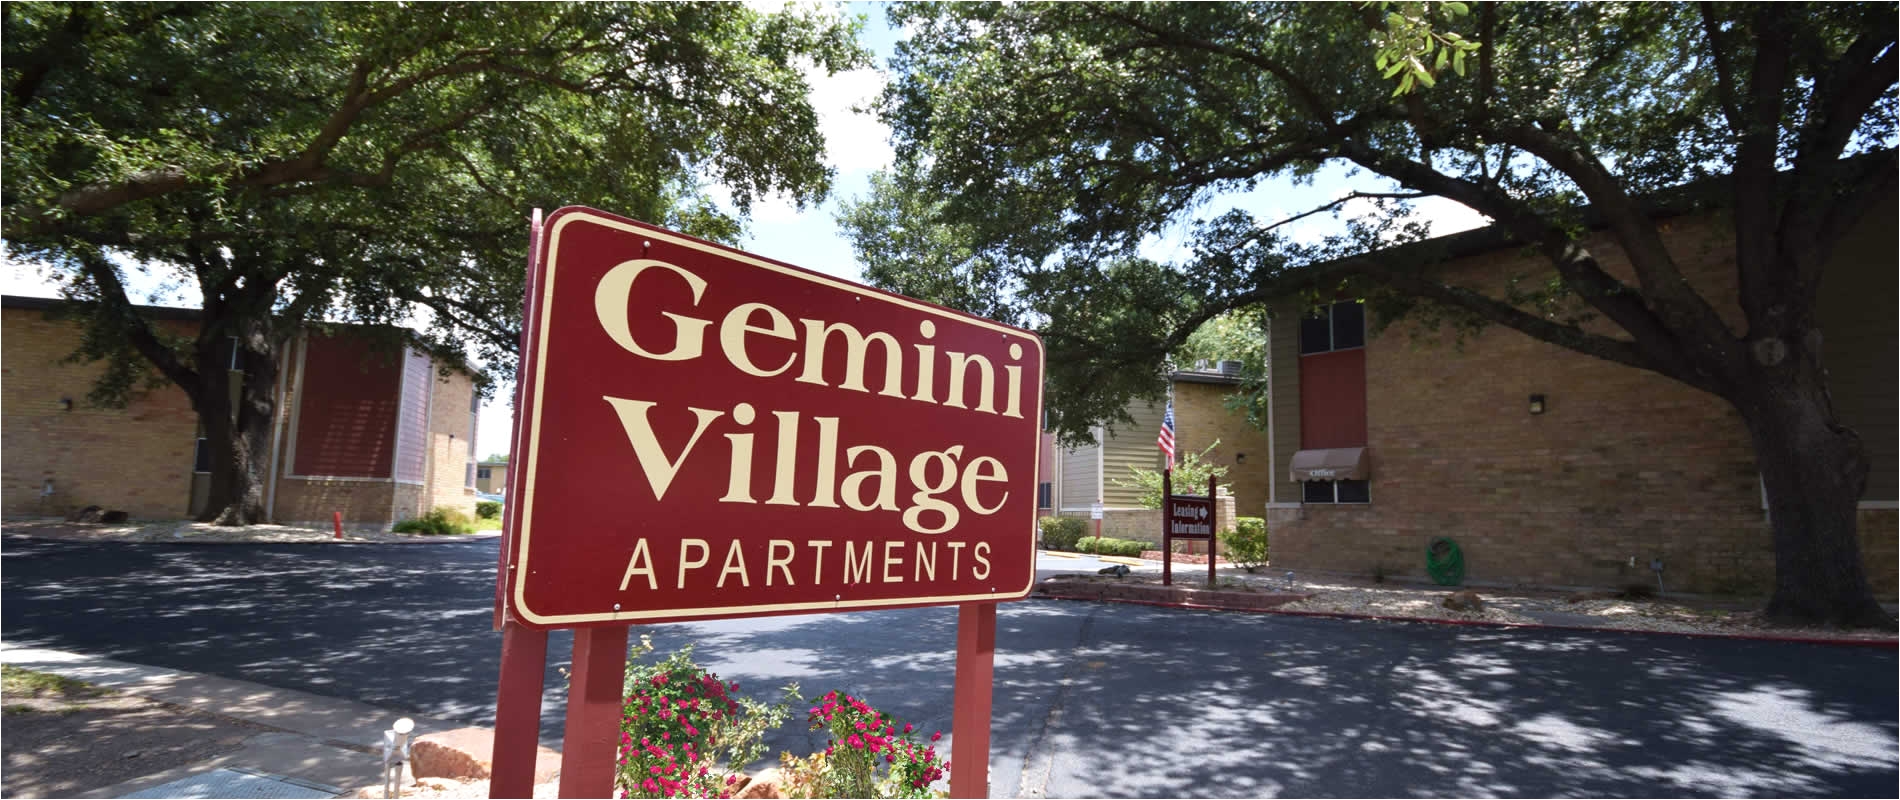 welcome to gemini village apartments in waco texas